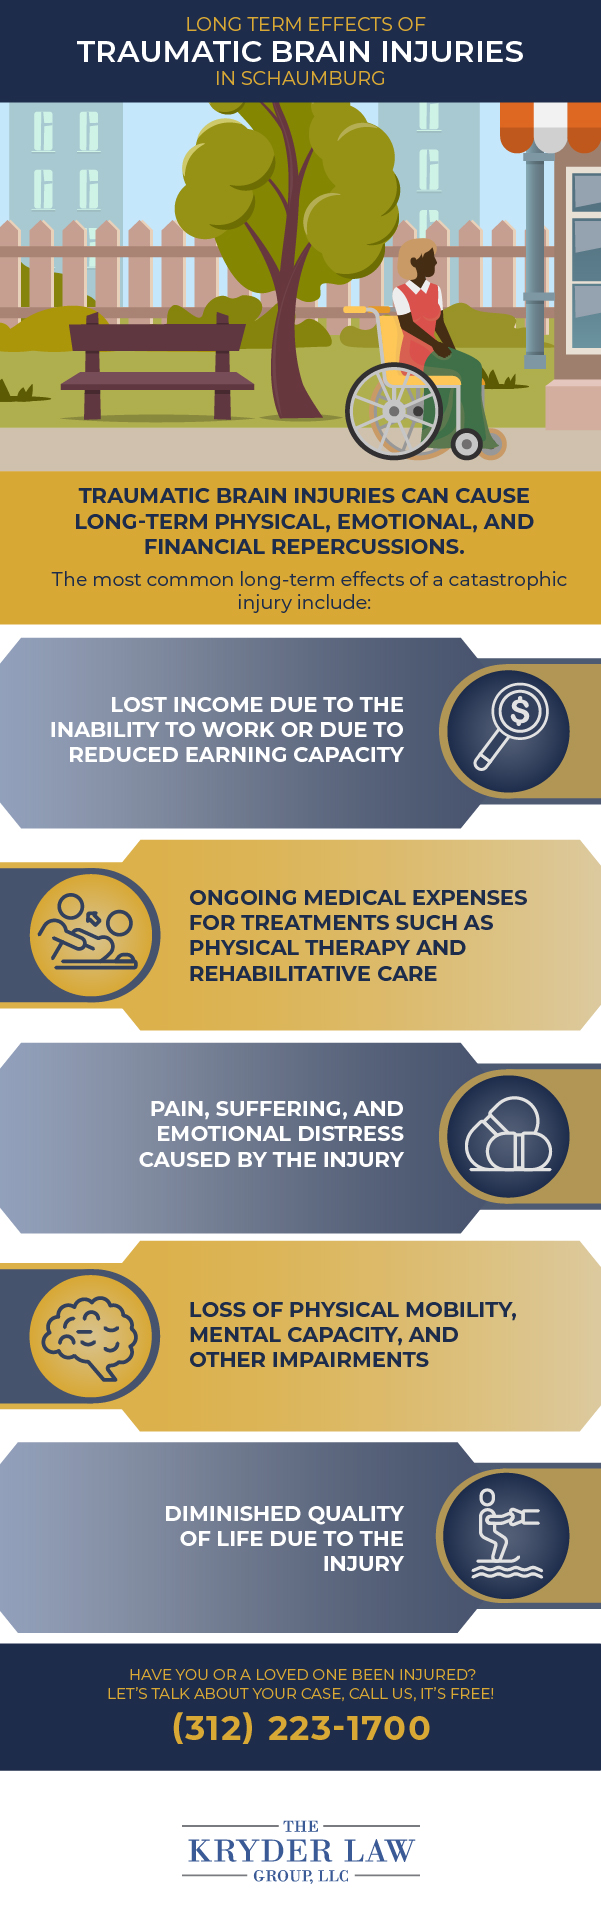 Long Term Effects of Traumatic Brain Injuries in Schaumburg Infographic